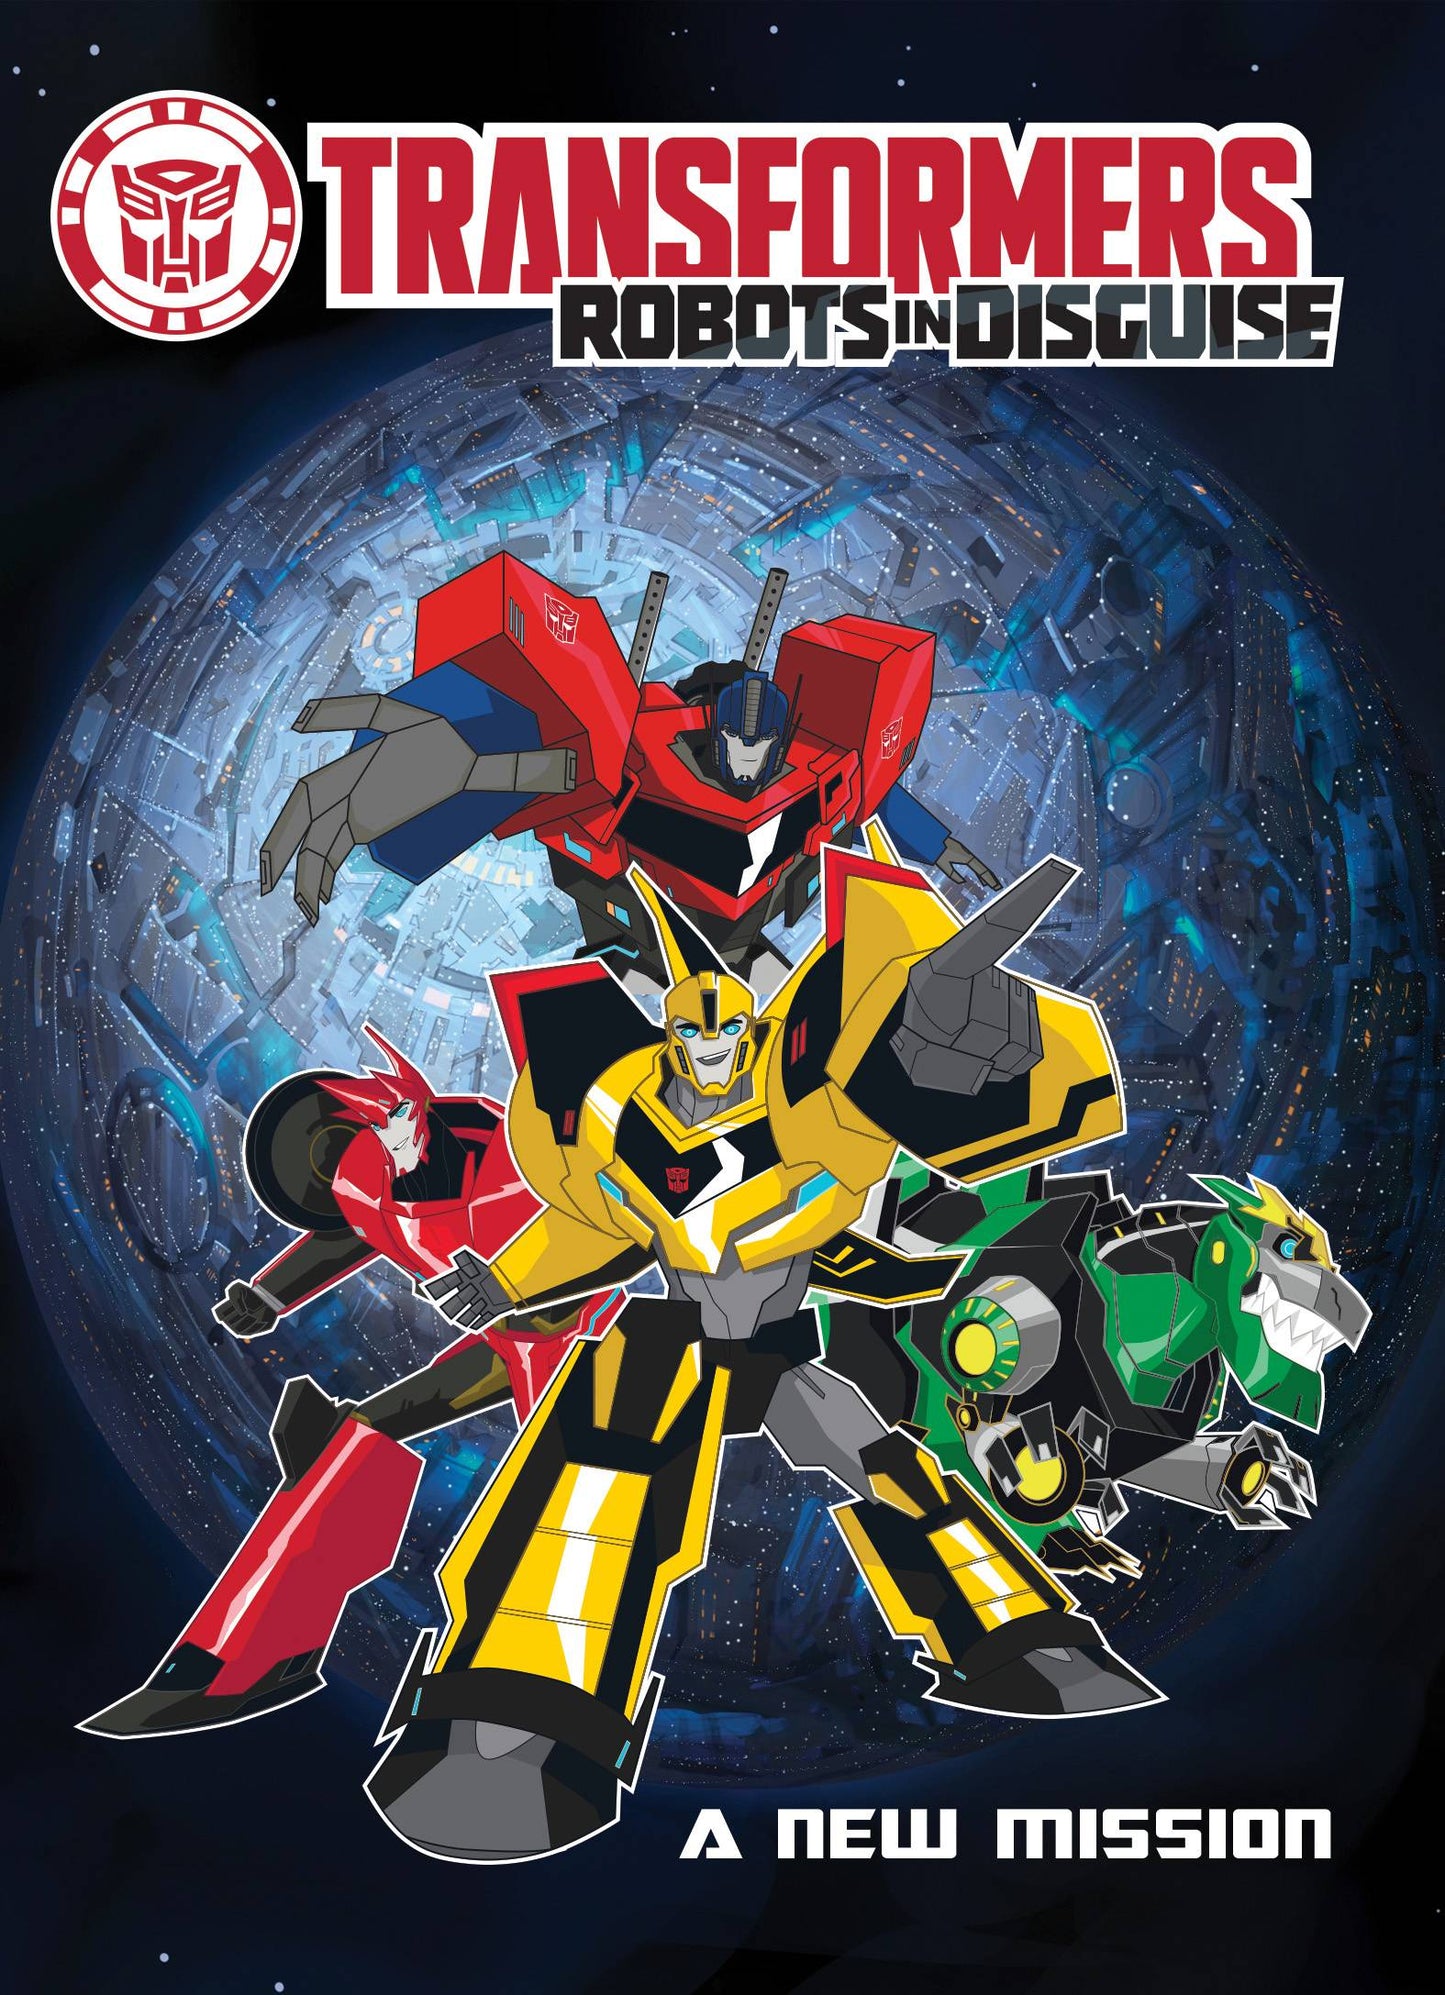 TRANSFORMERS ROBOTS IN DISGUISE A NEW MISSION